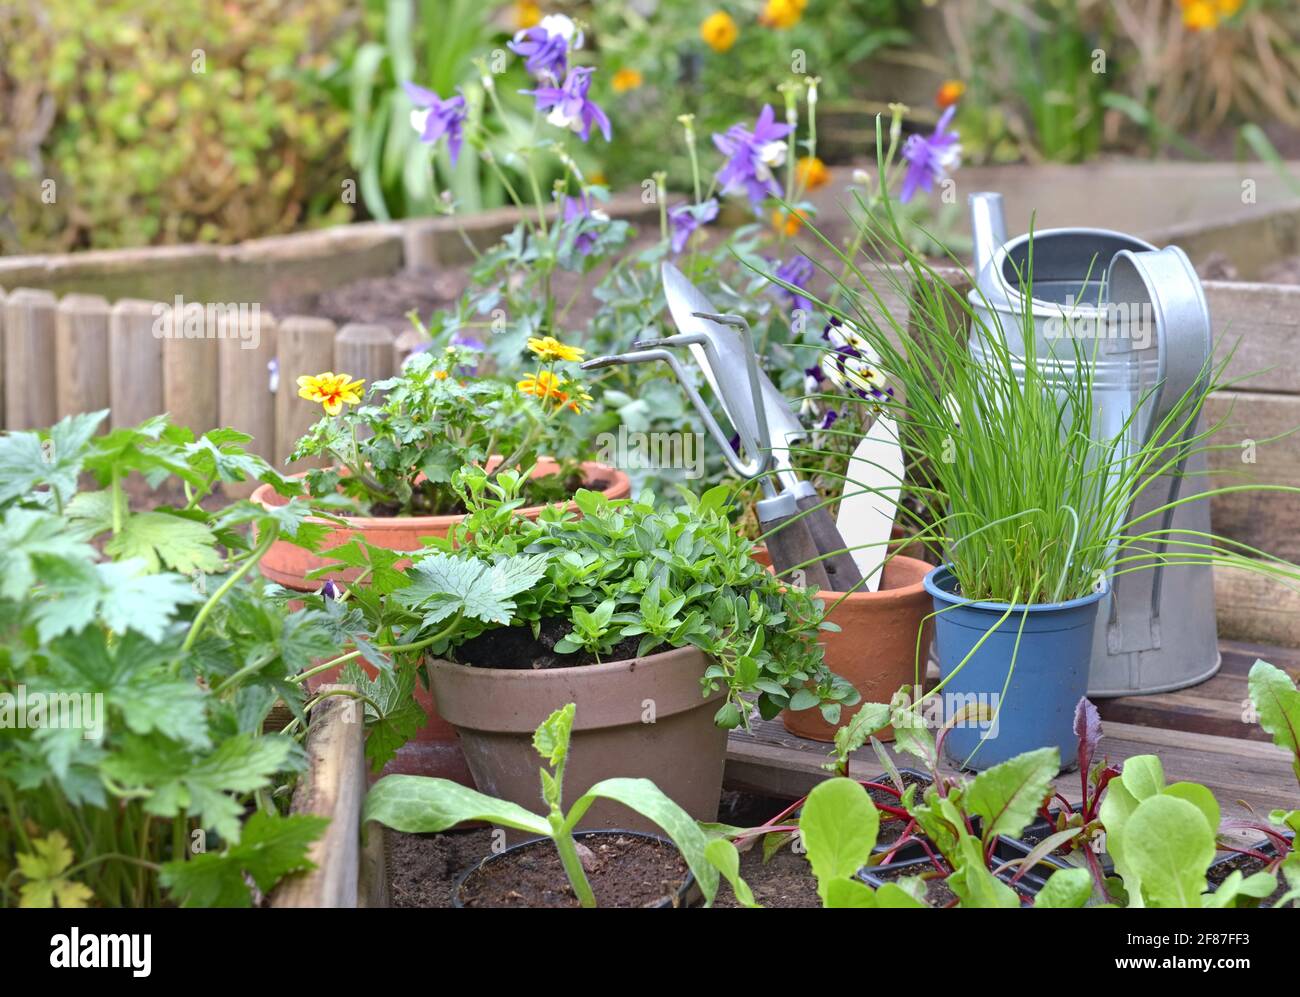 vegetable seedlings and aromatic plant with gardening equipment in a garden Stock Photo